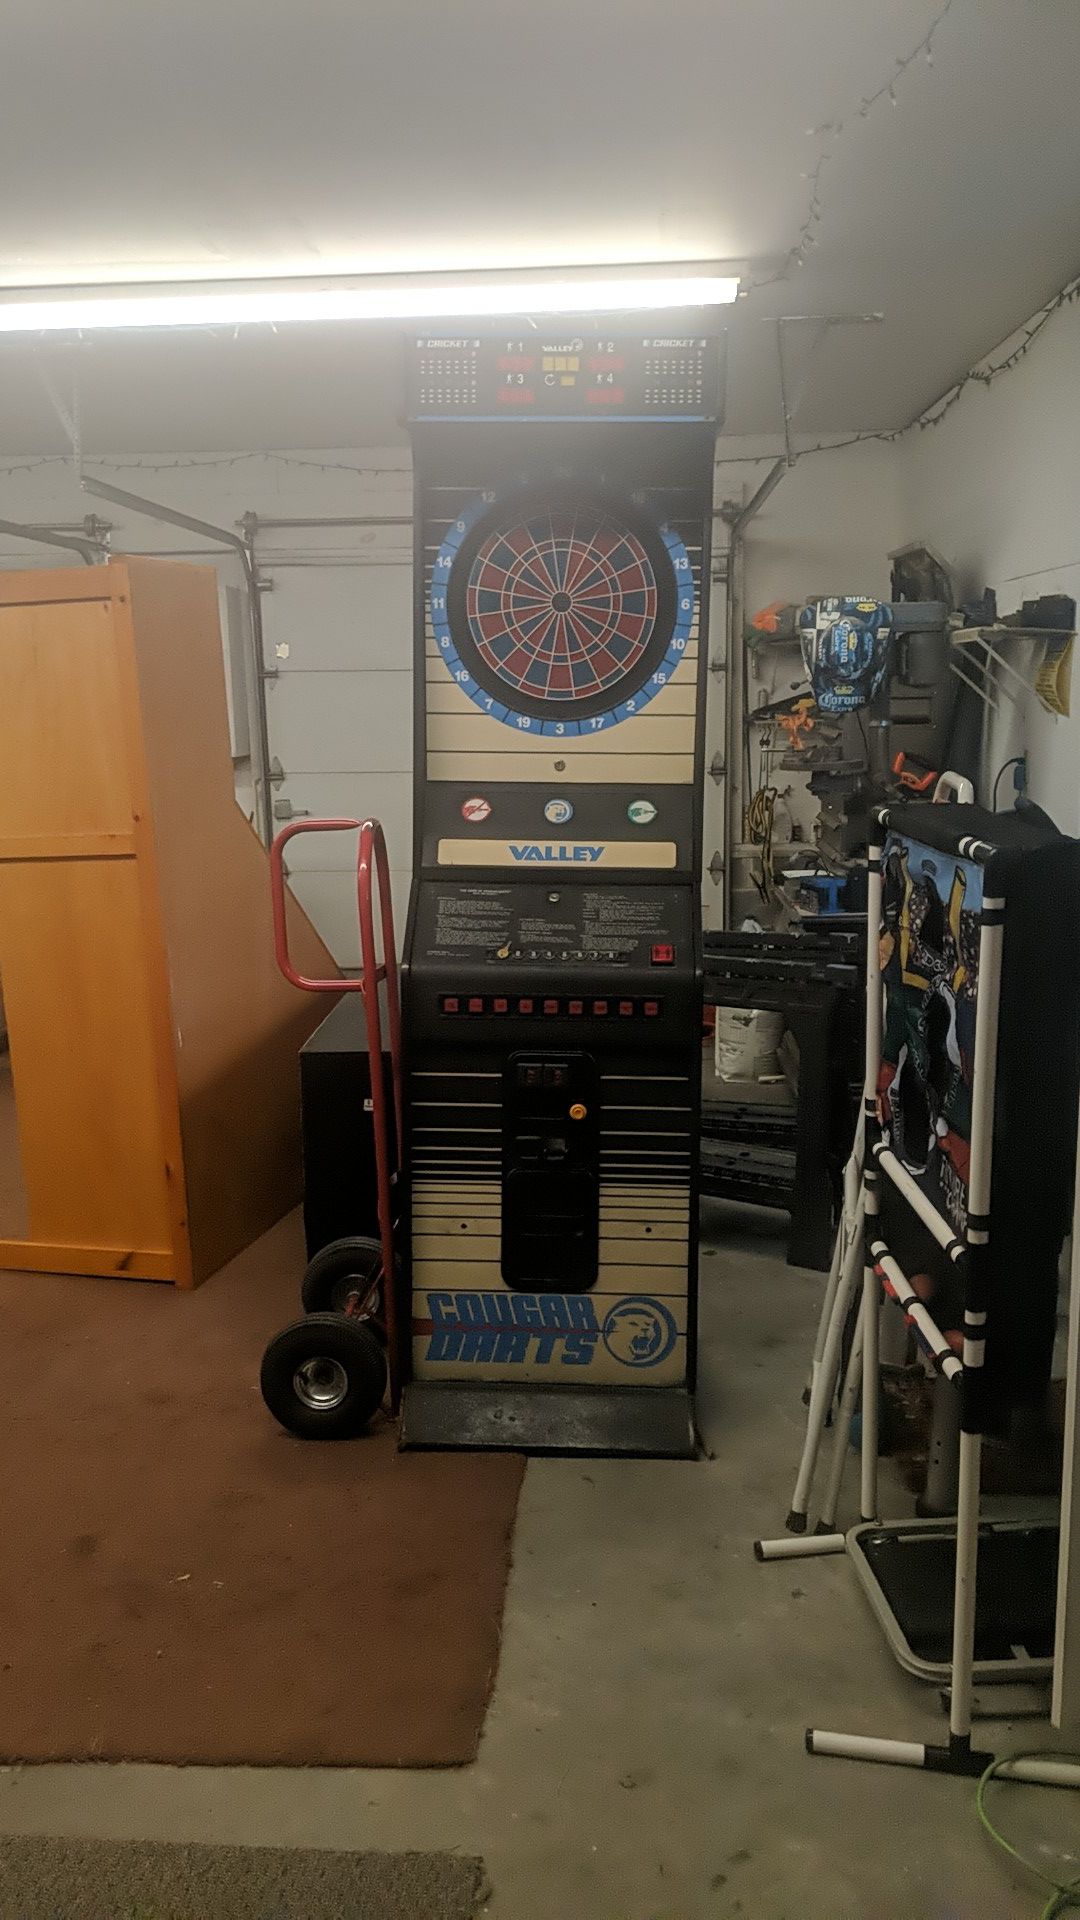 Valley electronic dartboard